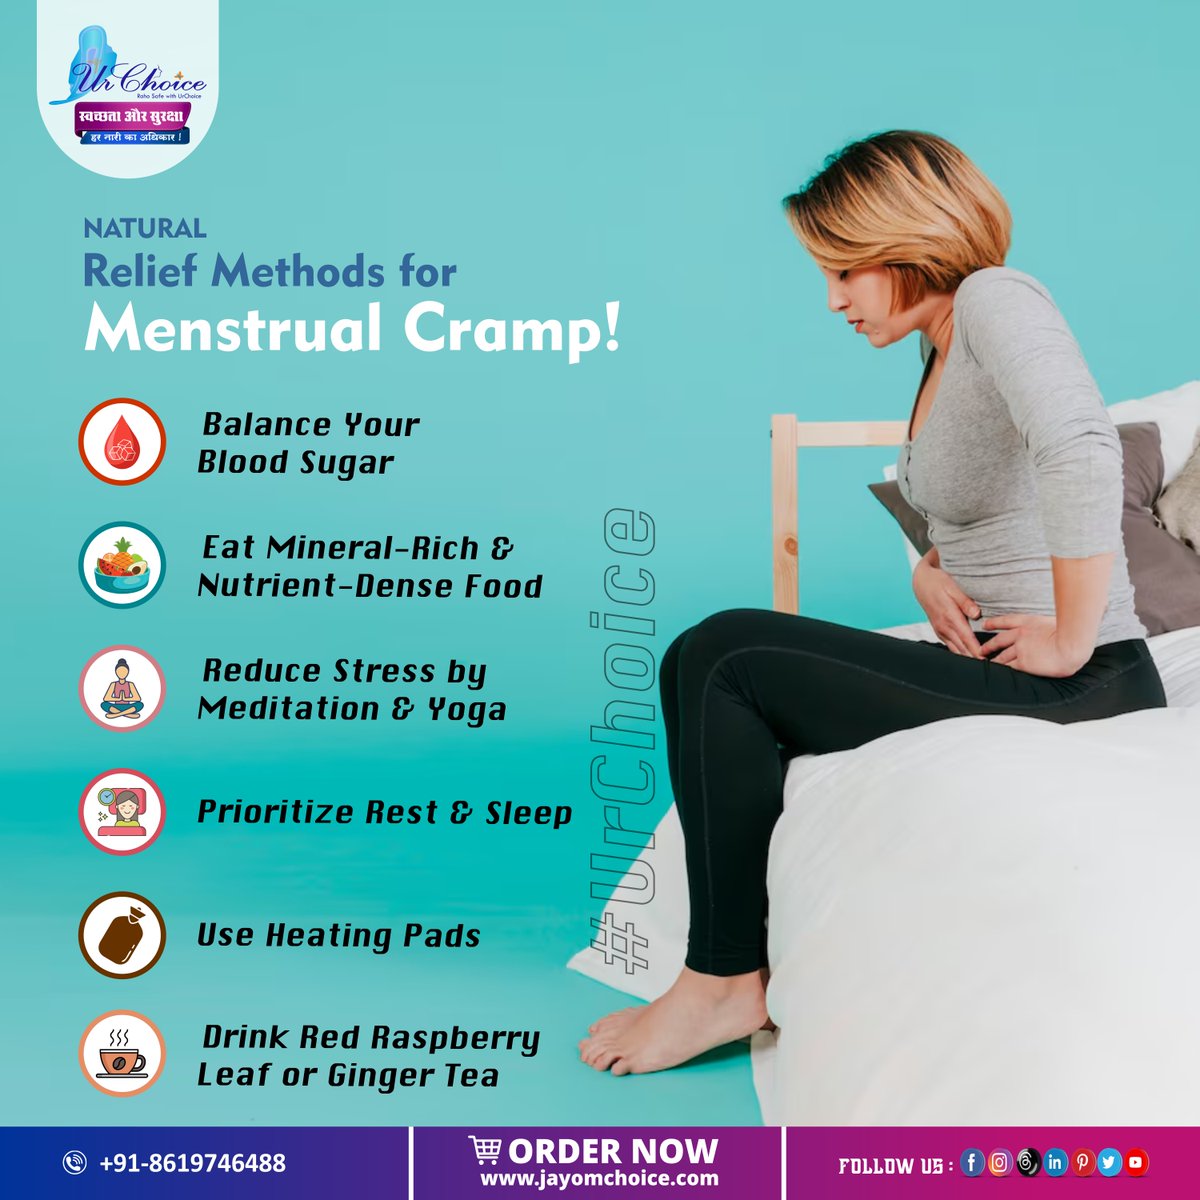 Say goodbye to period cramps! Discover natural relief methods to ease discomfort and regain control during your menstrual cycle. 
#urchoice #periodcramps #periodcrampsrelief #periodpain #PeriodPainRelief #PeriodProtection #comfort #Period #SanitaryPads #Menstruation #SanjuSamson